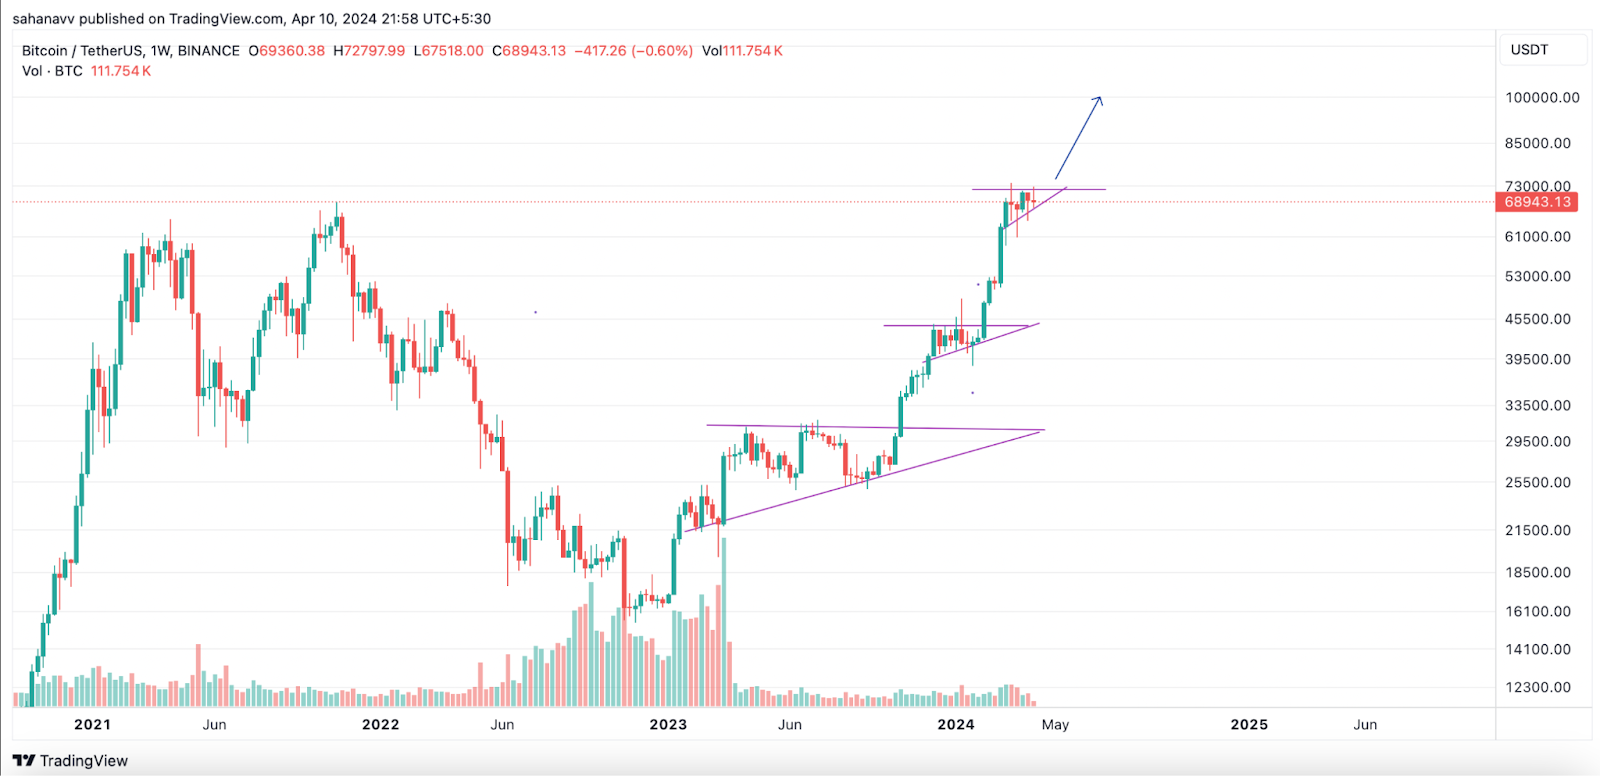 Bitcoin (BTC) Price Analysis: Is This the Final Leg Up to 0K?